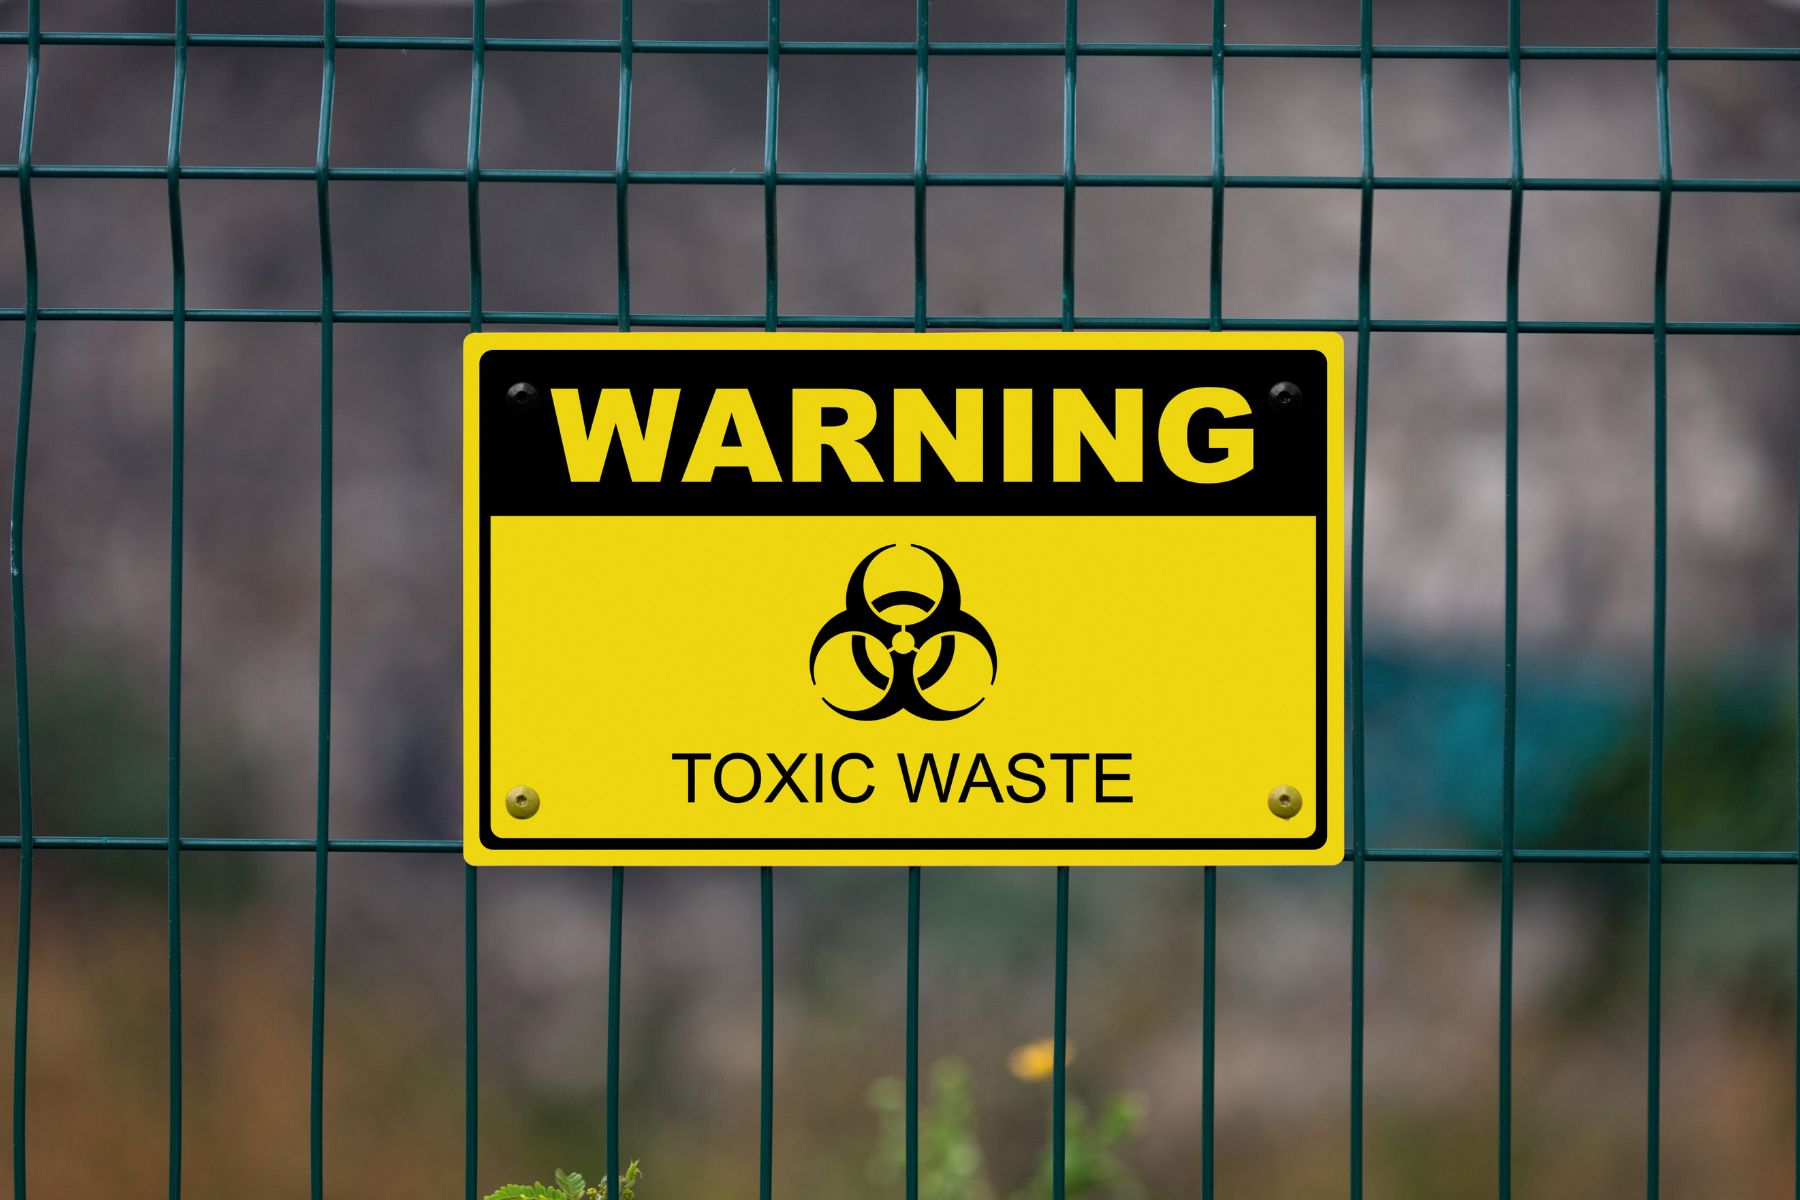 Image is of a Sign that Says Toxic Waste Warning. Source: Canva